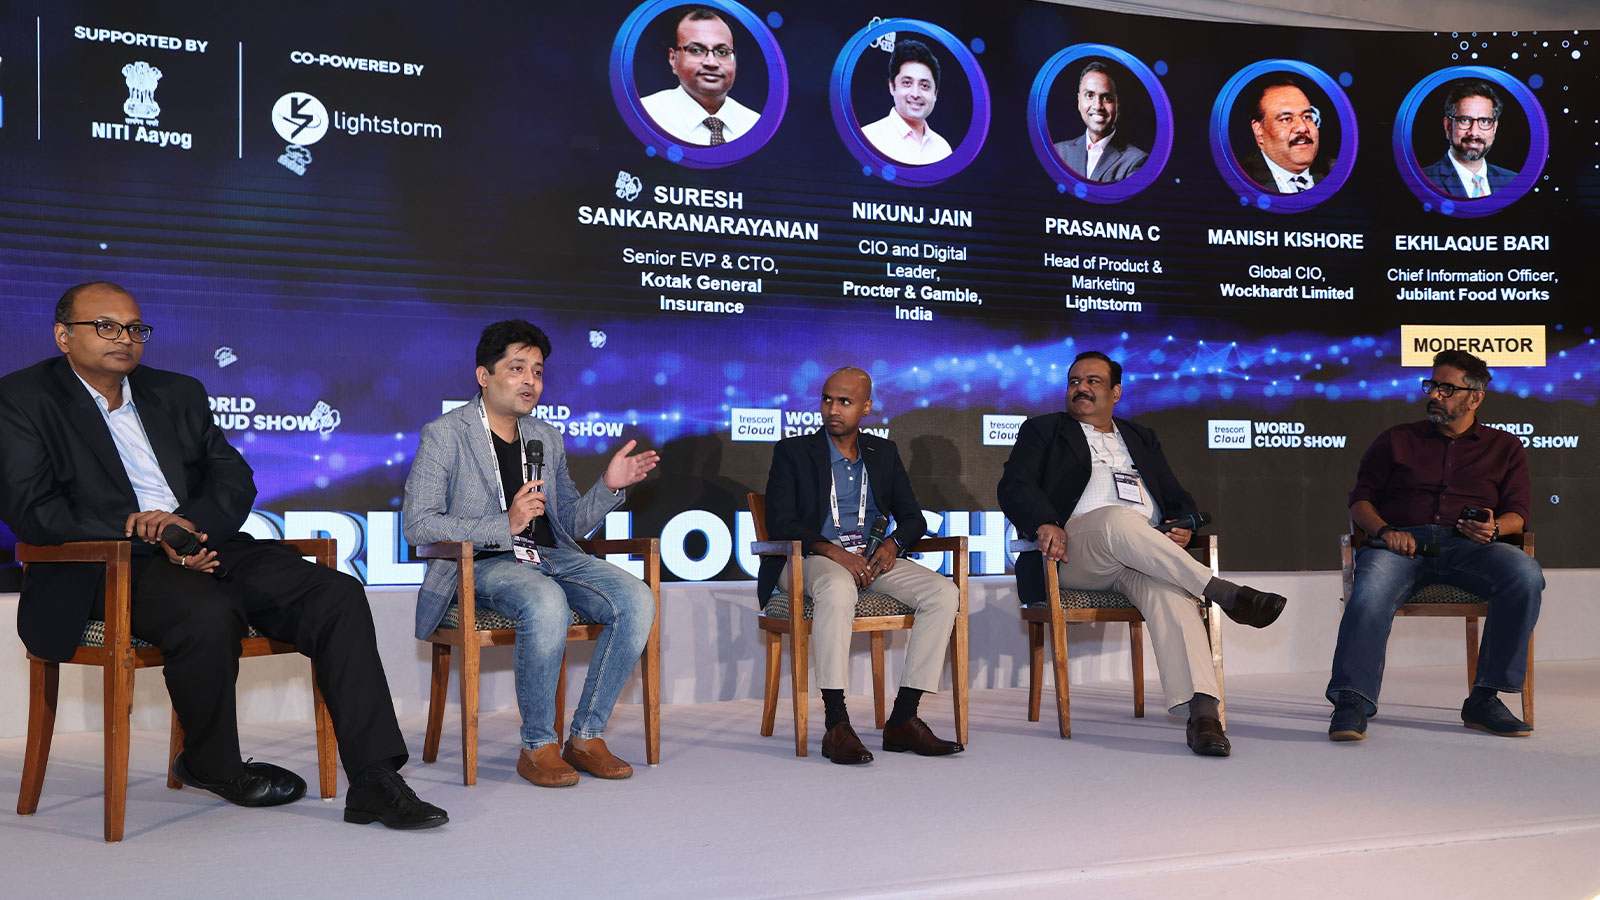 The 18th Edition of World Cloud Show Presented an Incisive Analysis of Cloud and Data Centers in India